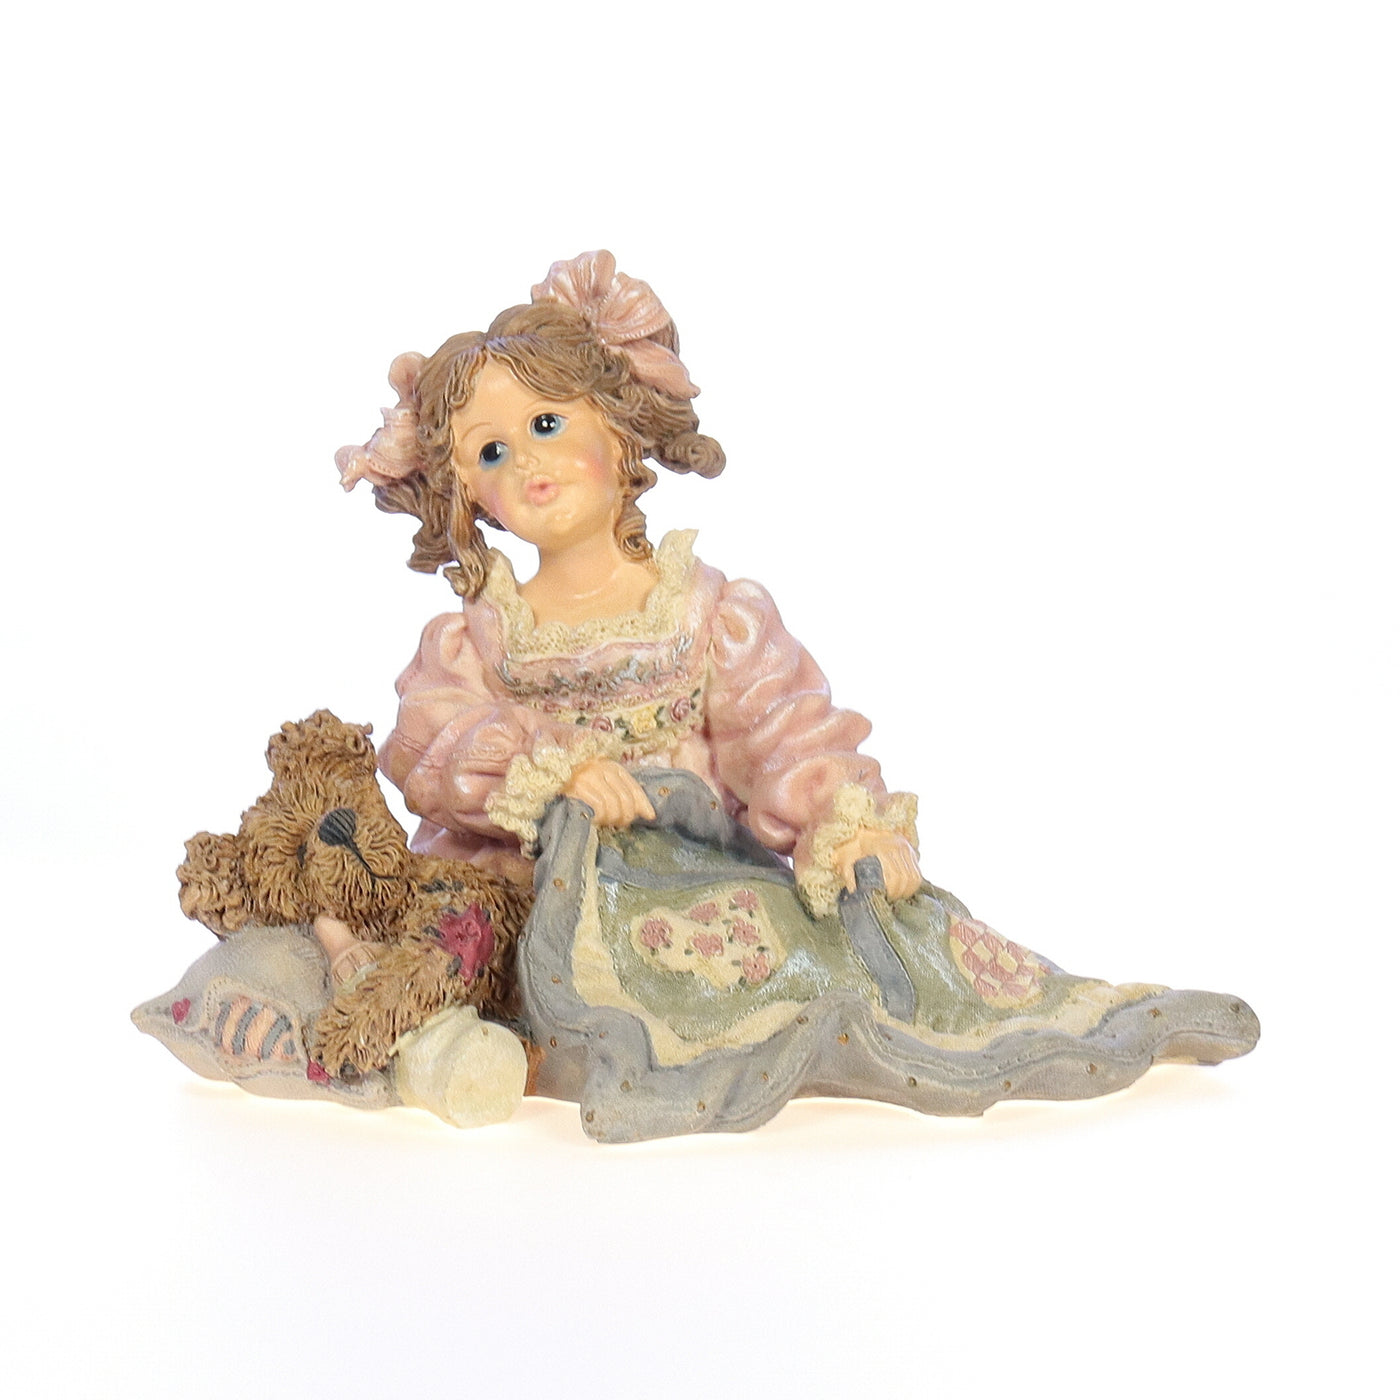 The Dollstone Collection Vintage Resin Childhood Limited Edition Figurine 3544V